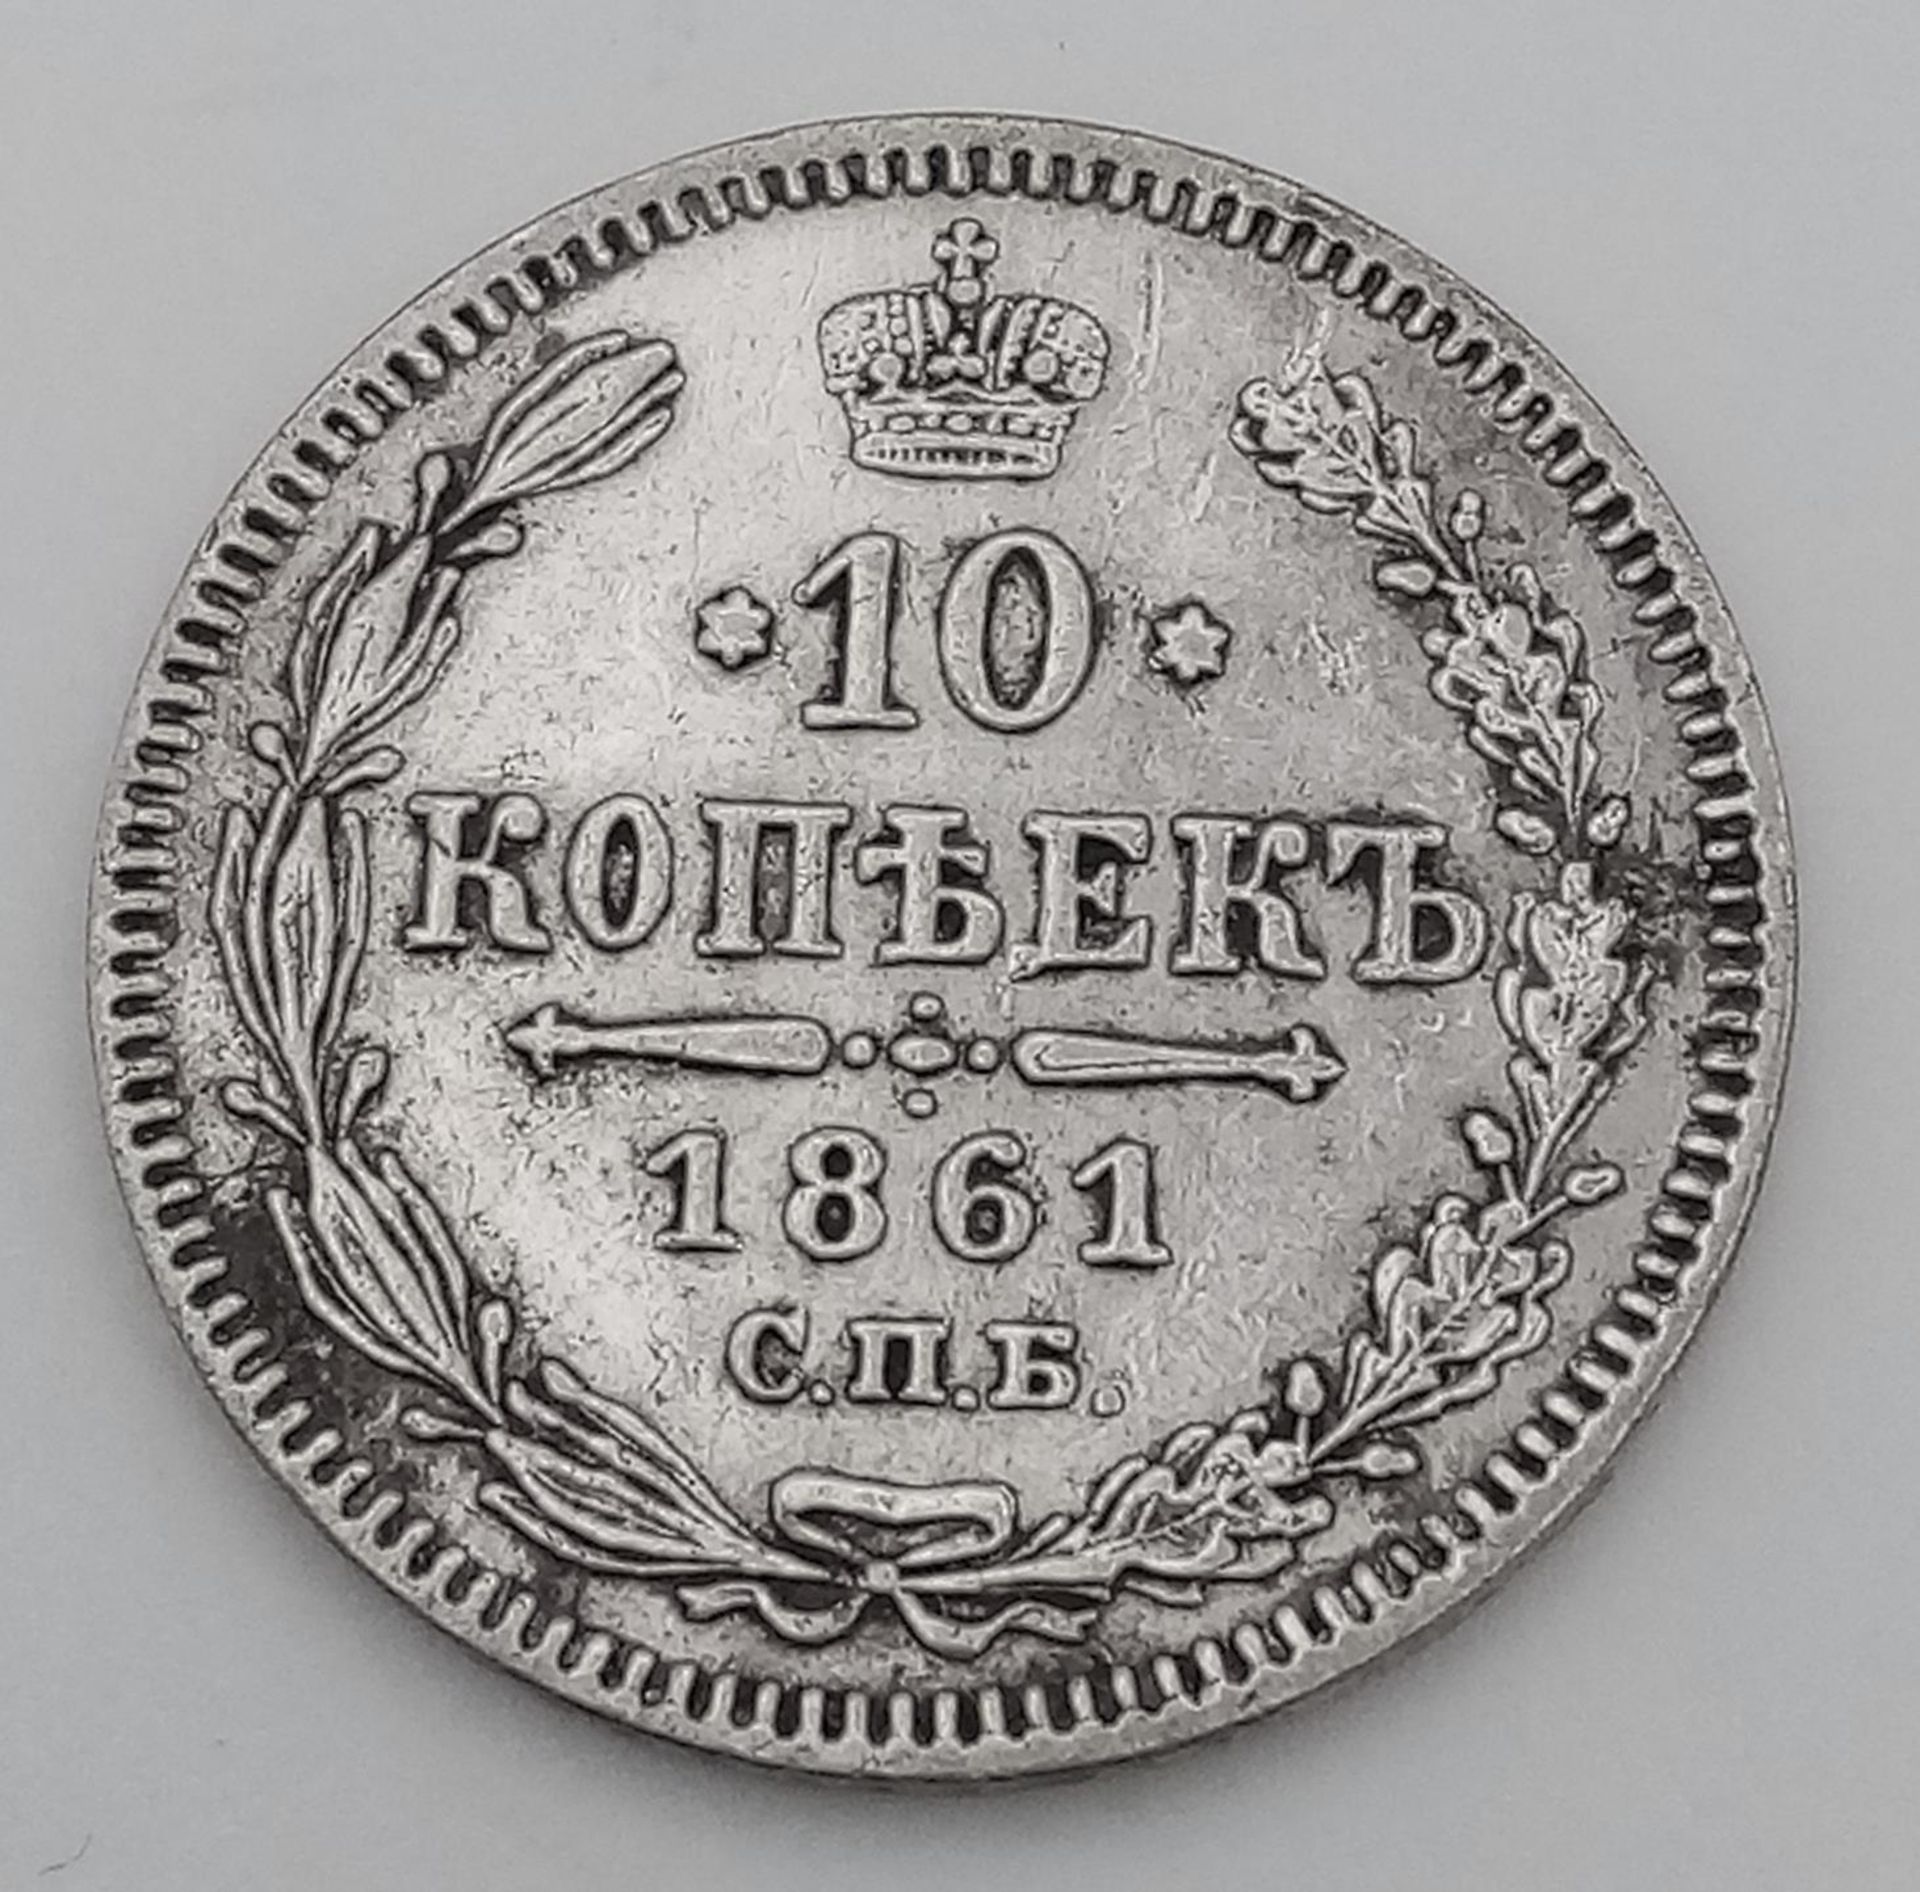 An Extremely Fine Condition 1861 Russian Silver 10 Kopek Coin.